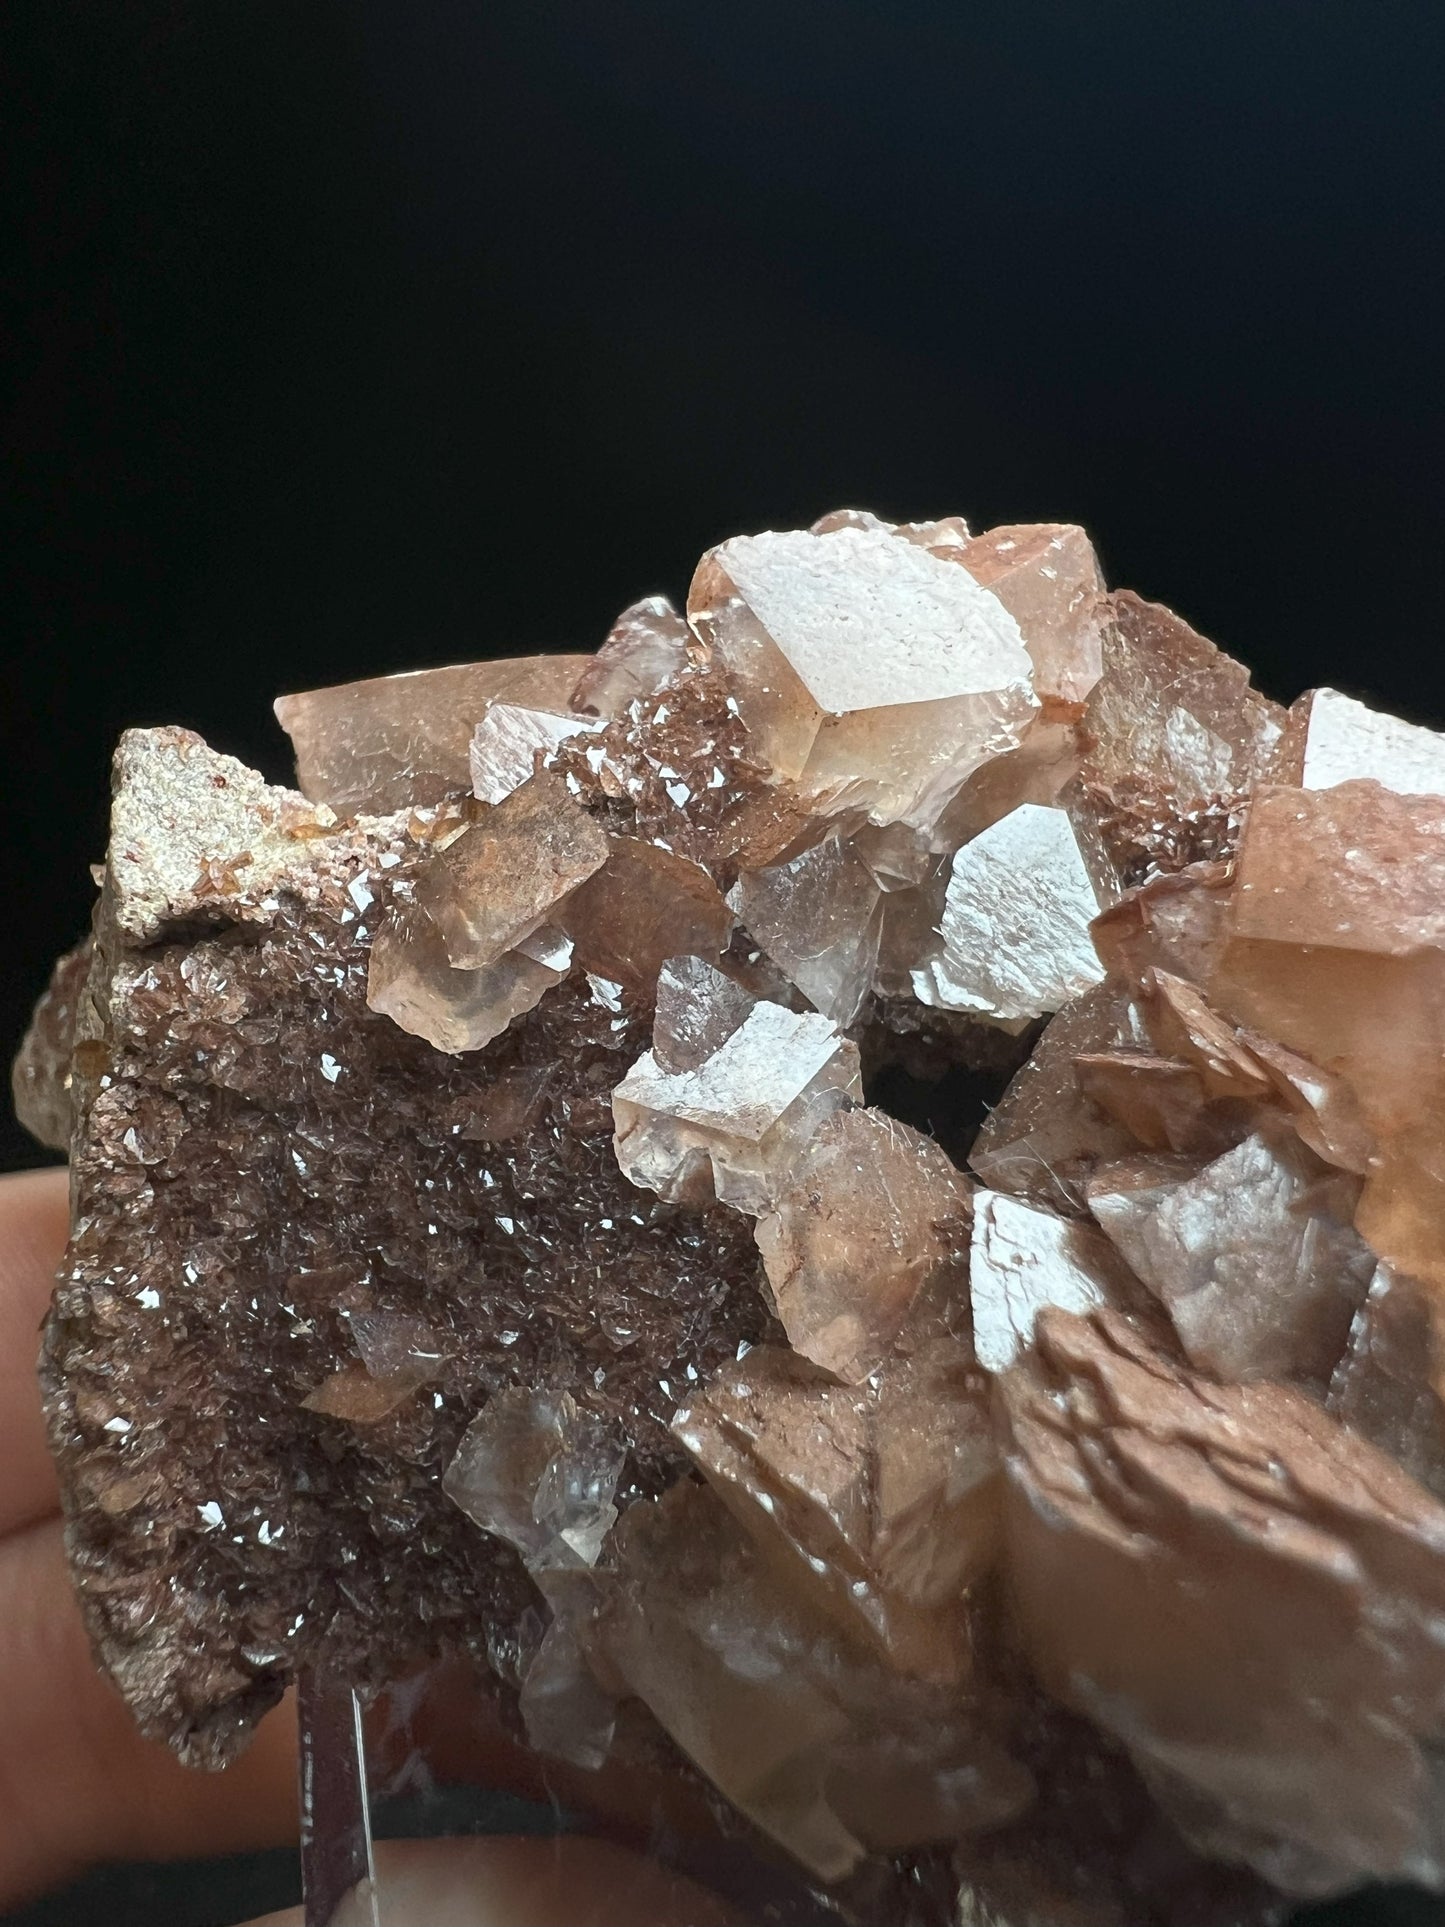 Calcite With Red Hematite Coating From Ton Mahr Quarry, Cardiff, Wales